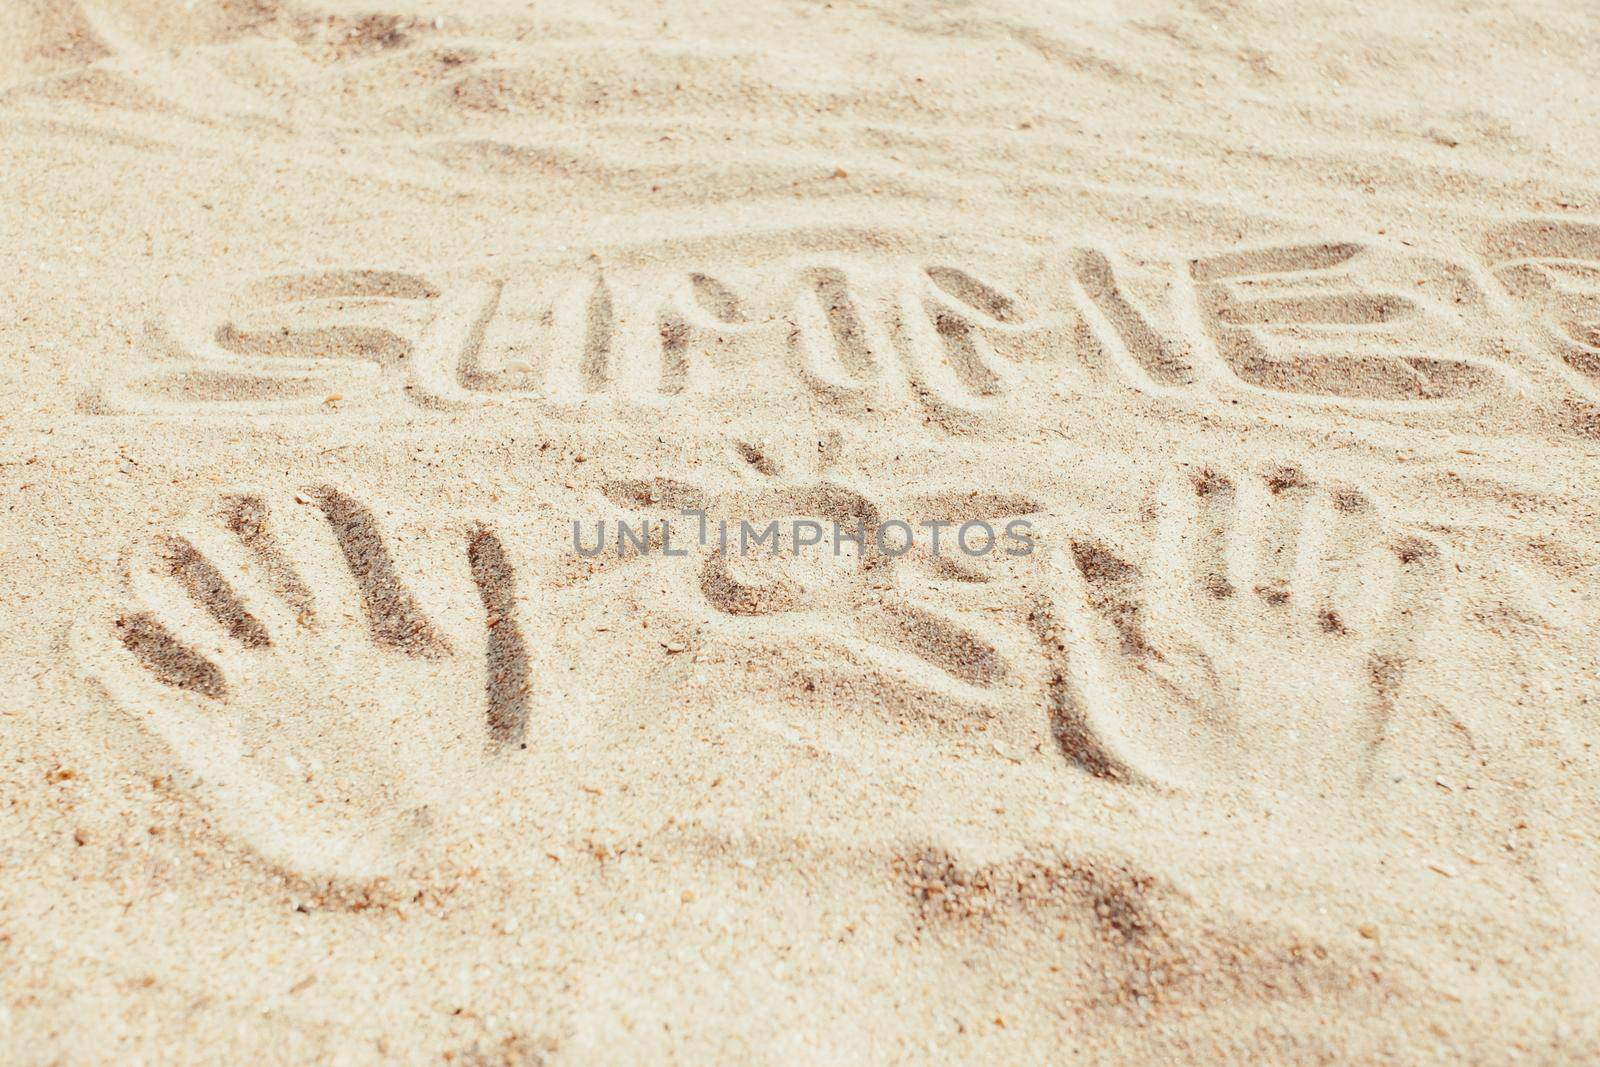 Inscription word summer and hand prints with drawing sun on sand, concept of vacations.